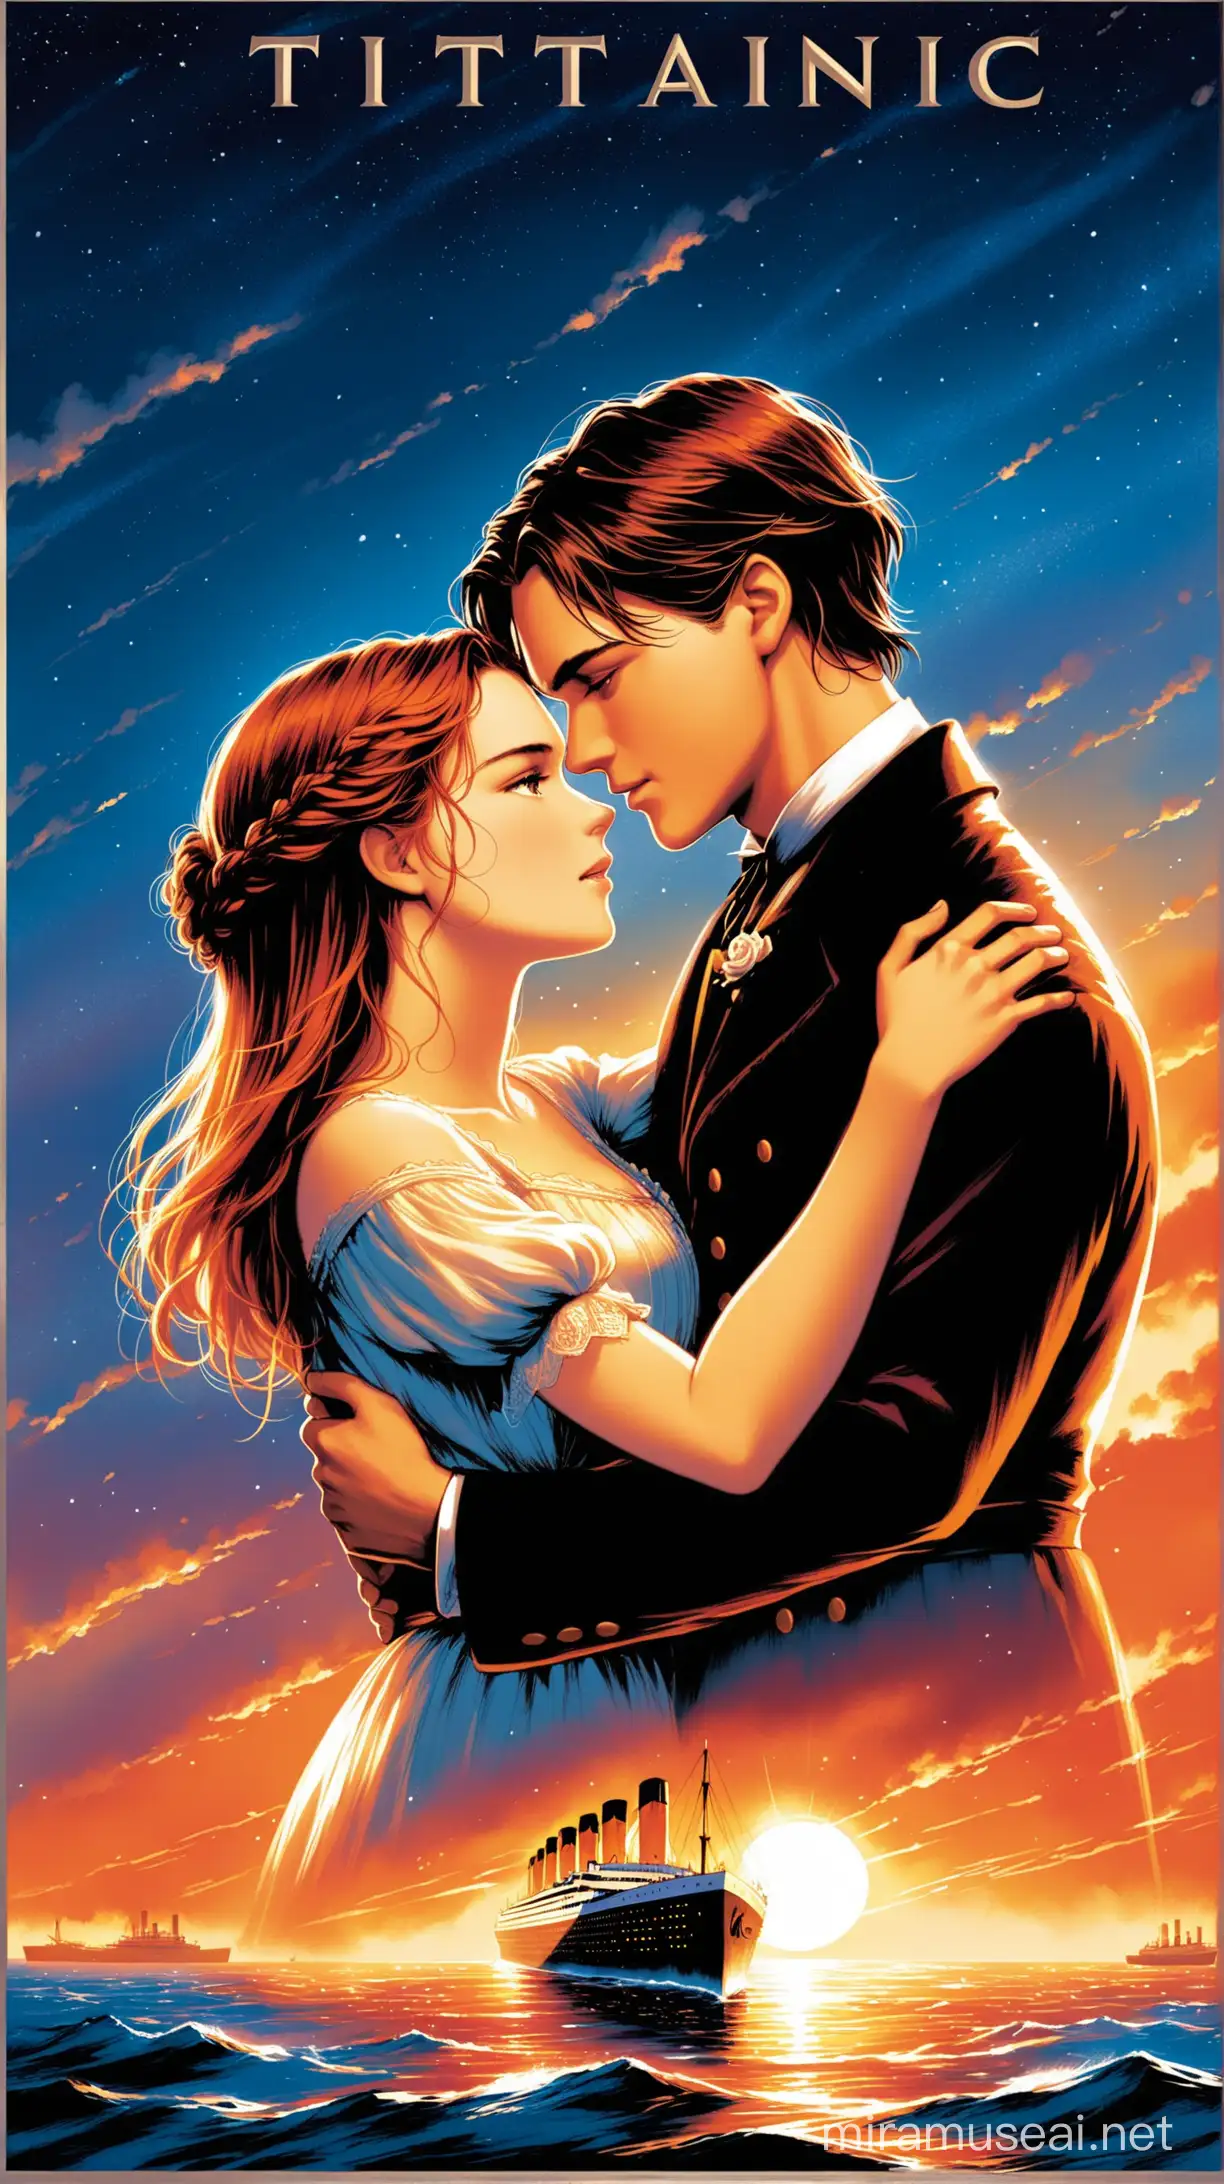 Titanic movie poster showing the protagonists Jack and Rose embracing each other face to face
